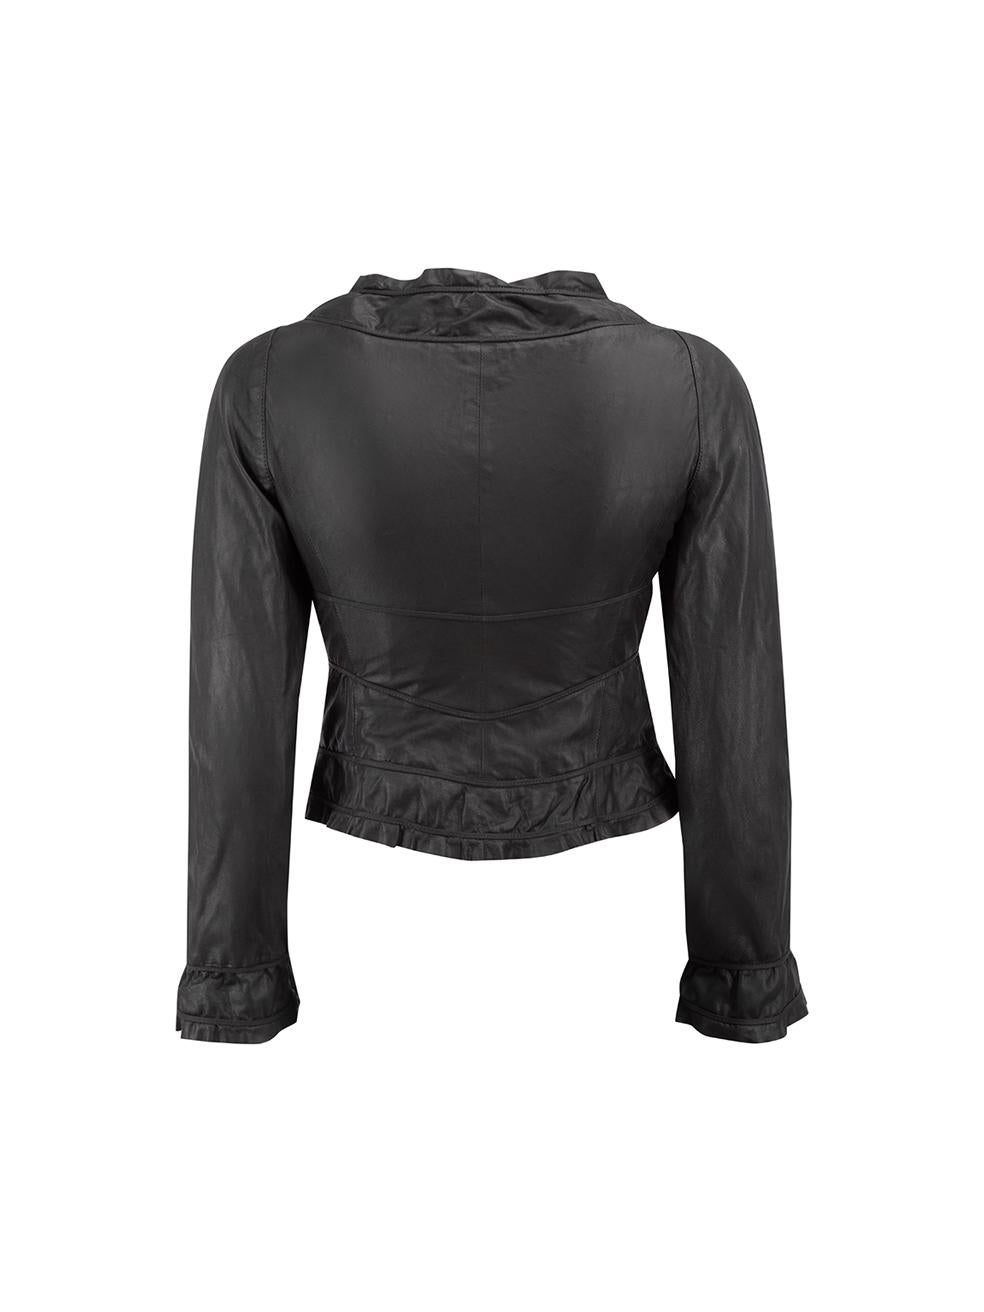 Emporio Armani Women's Black Leather Ruffles Accent Jacket In Good Condition For Sale In London, GB